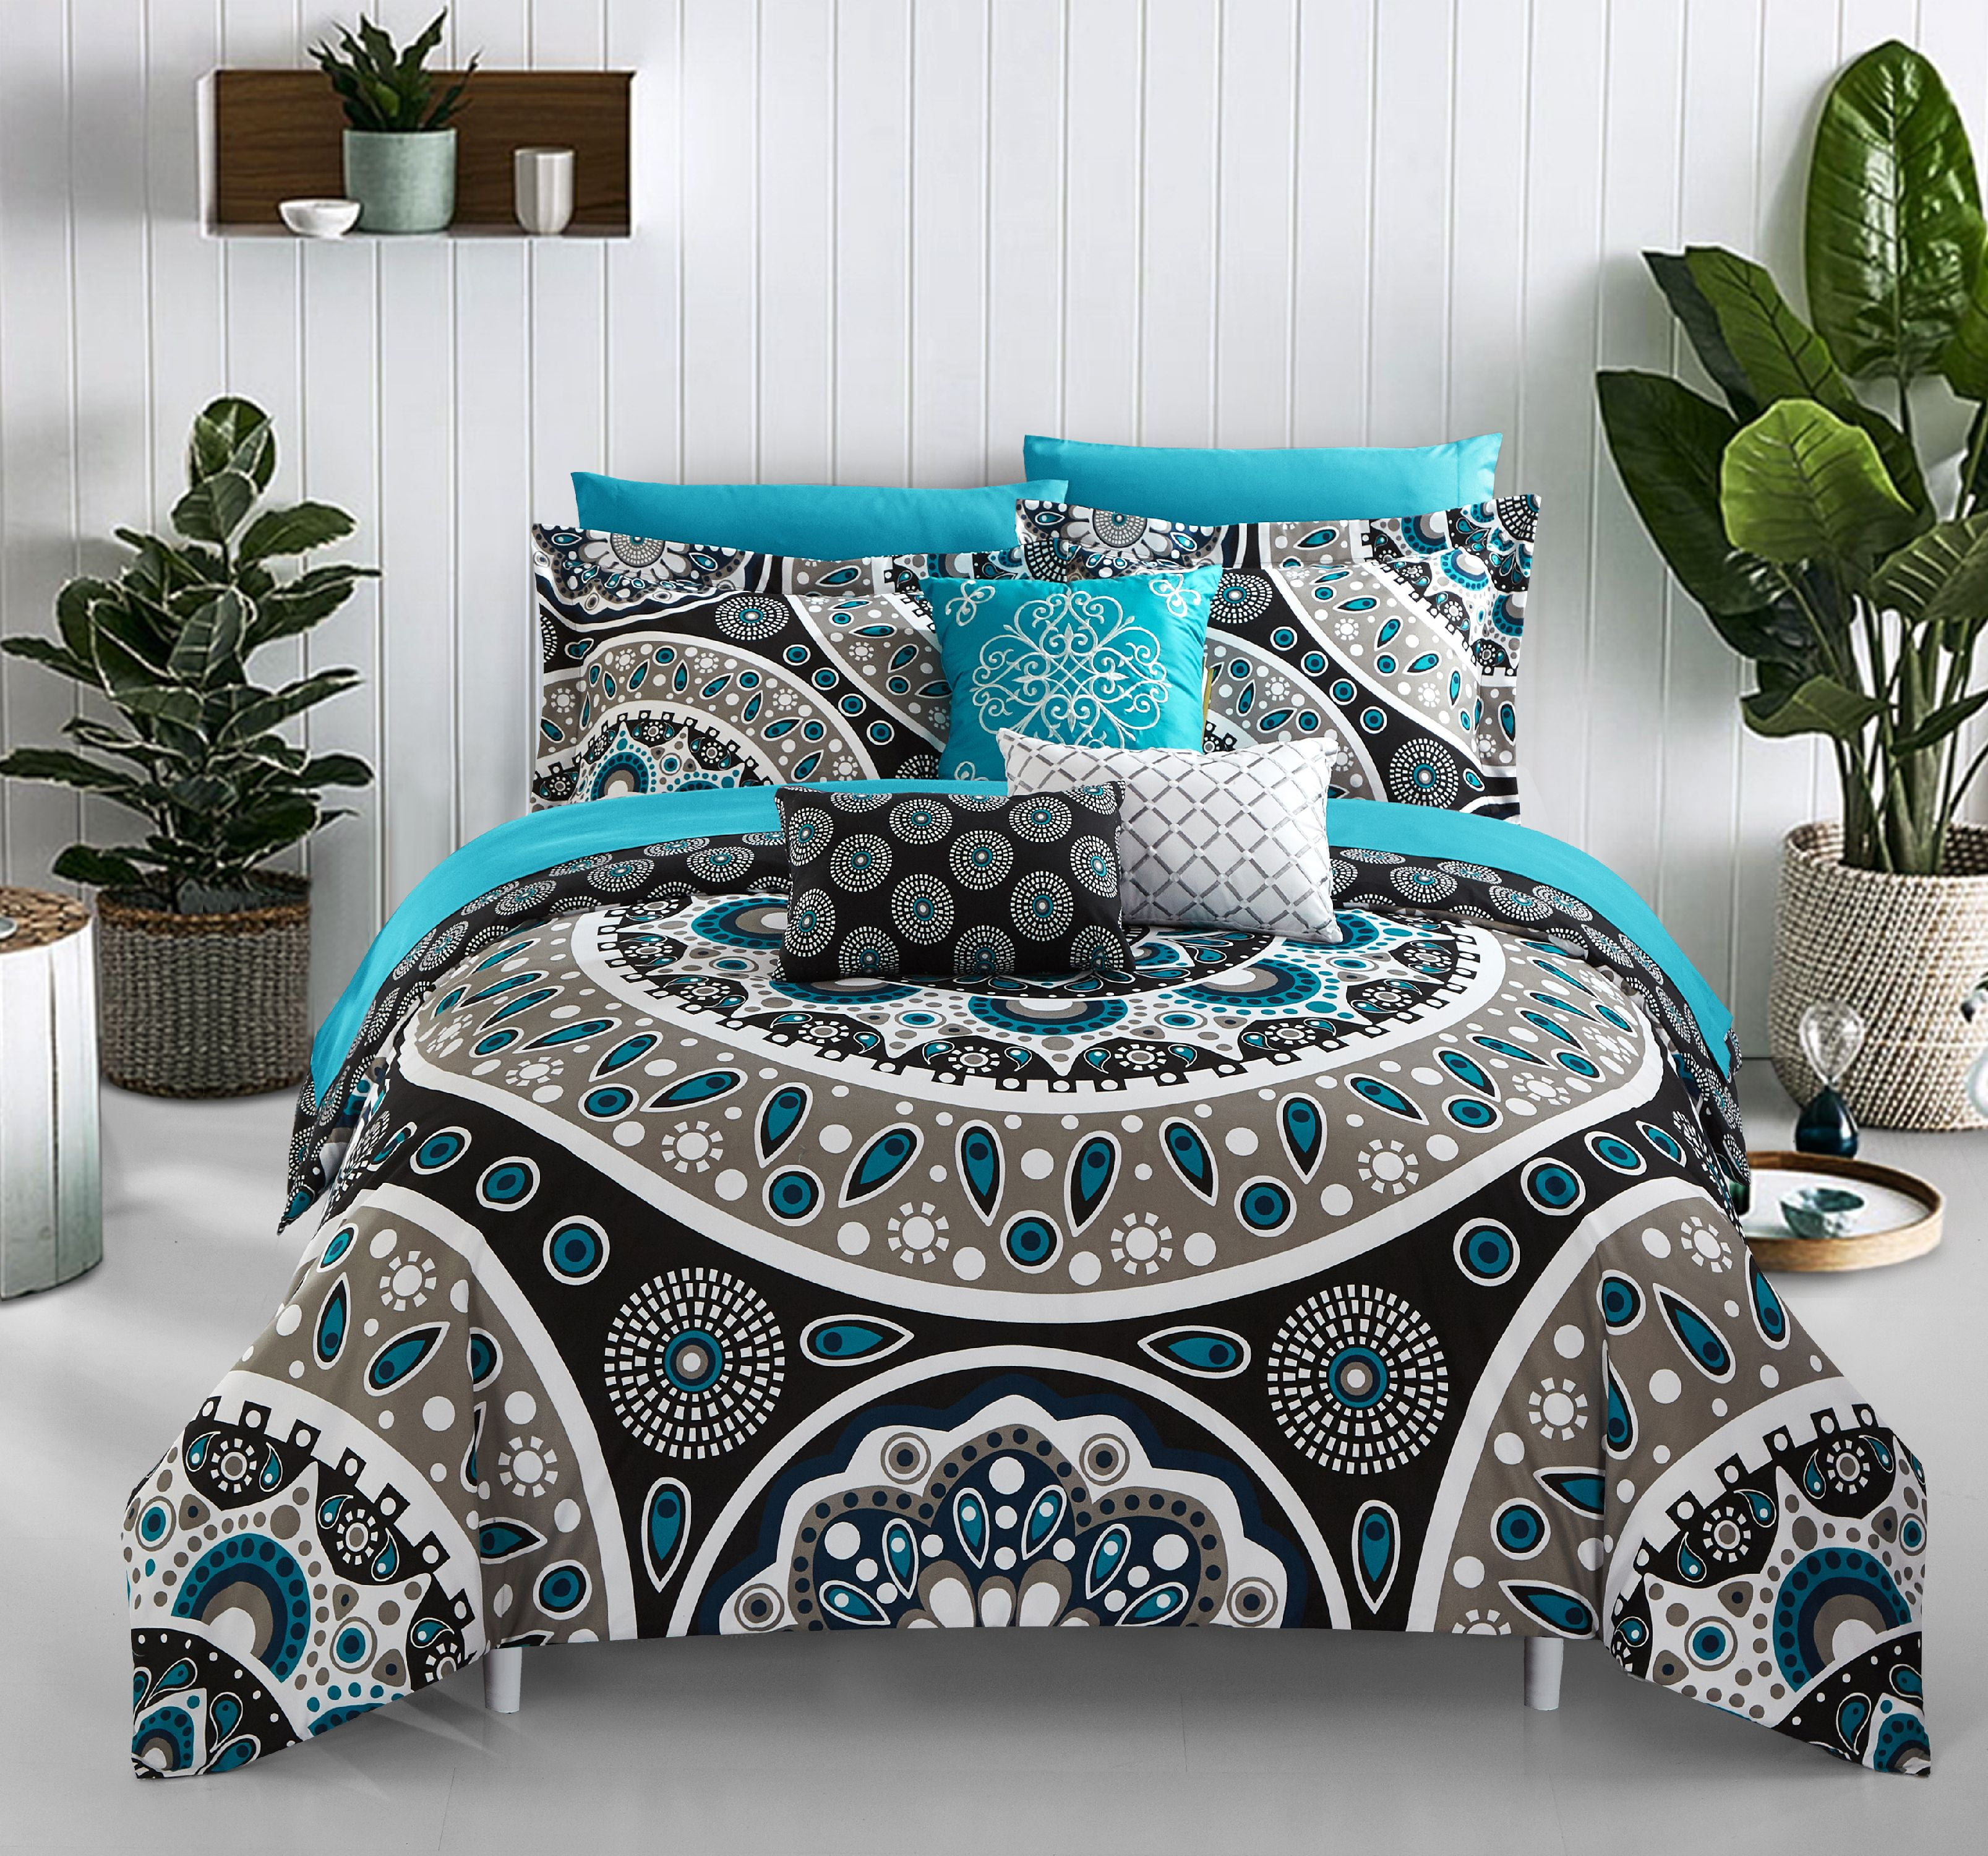 Chic Home Moriarty 10 Piece Comforter Set Color Block Ruffled Bed in a Bag... 